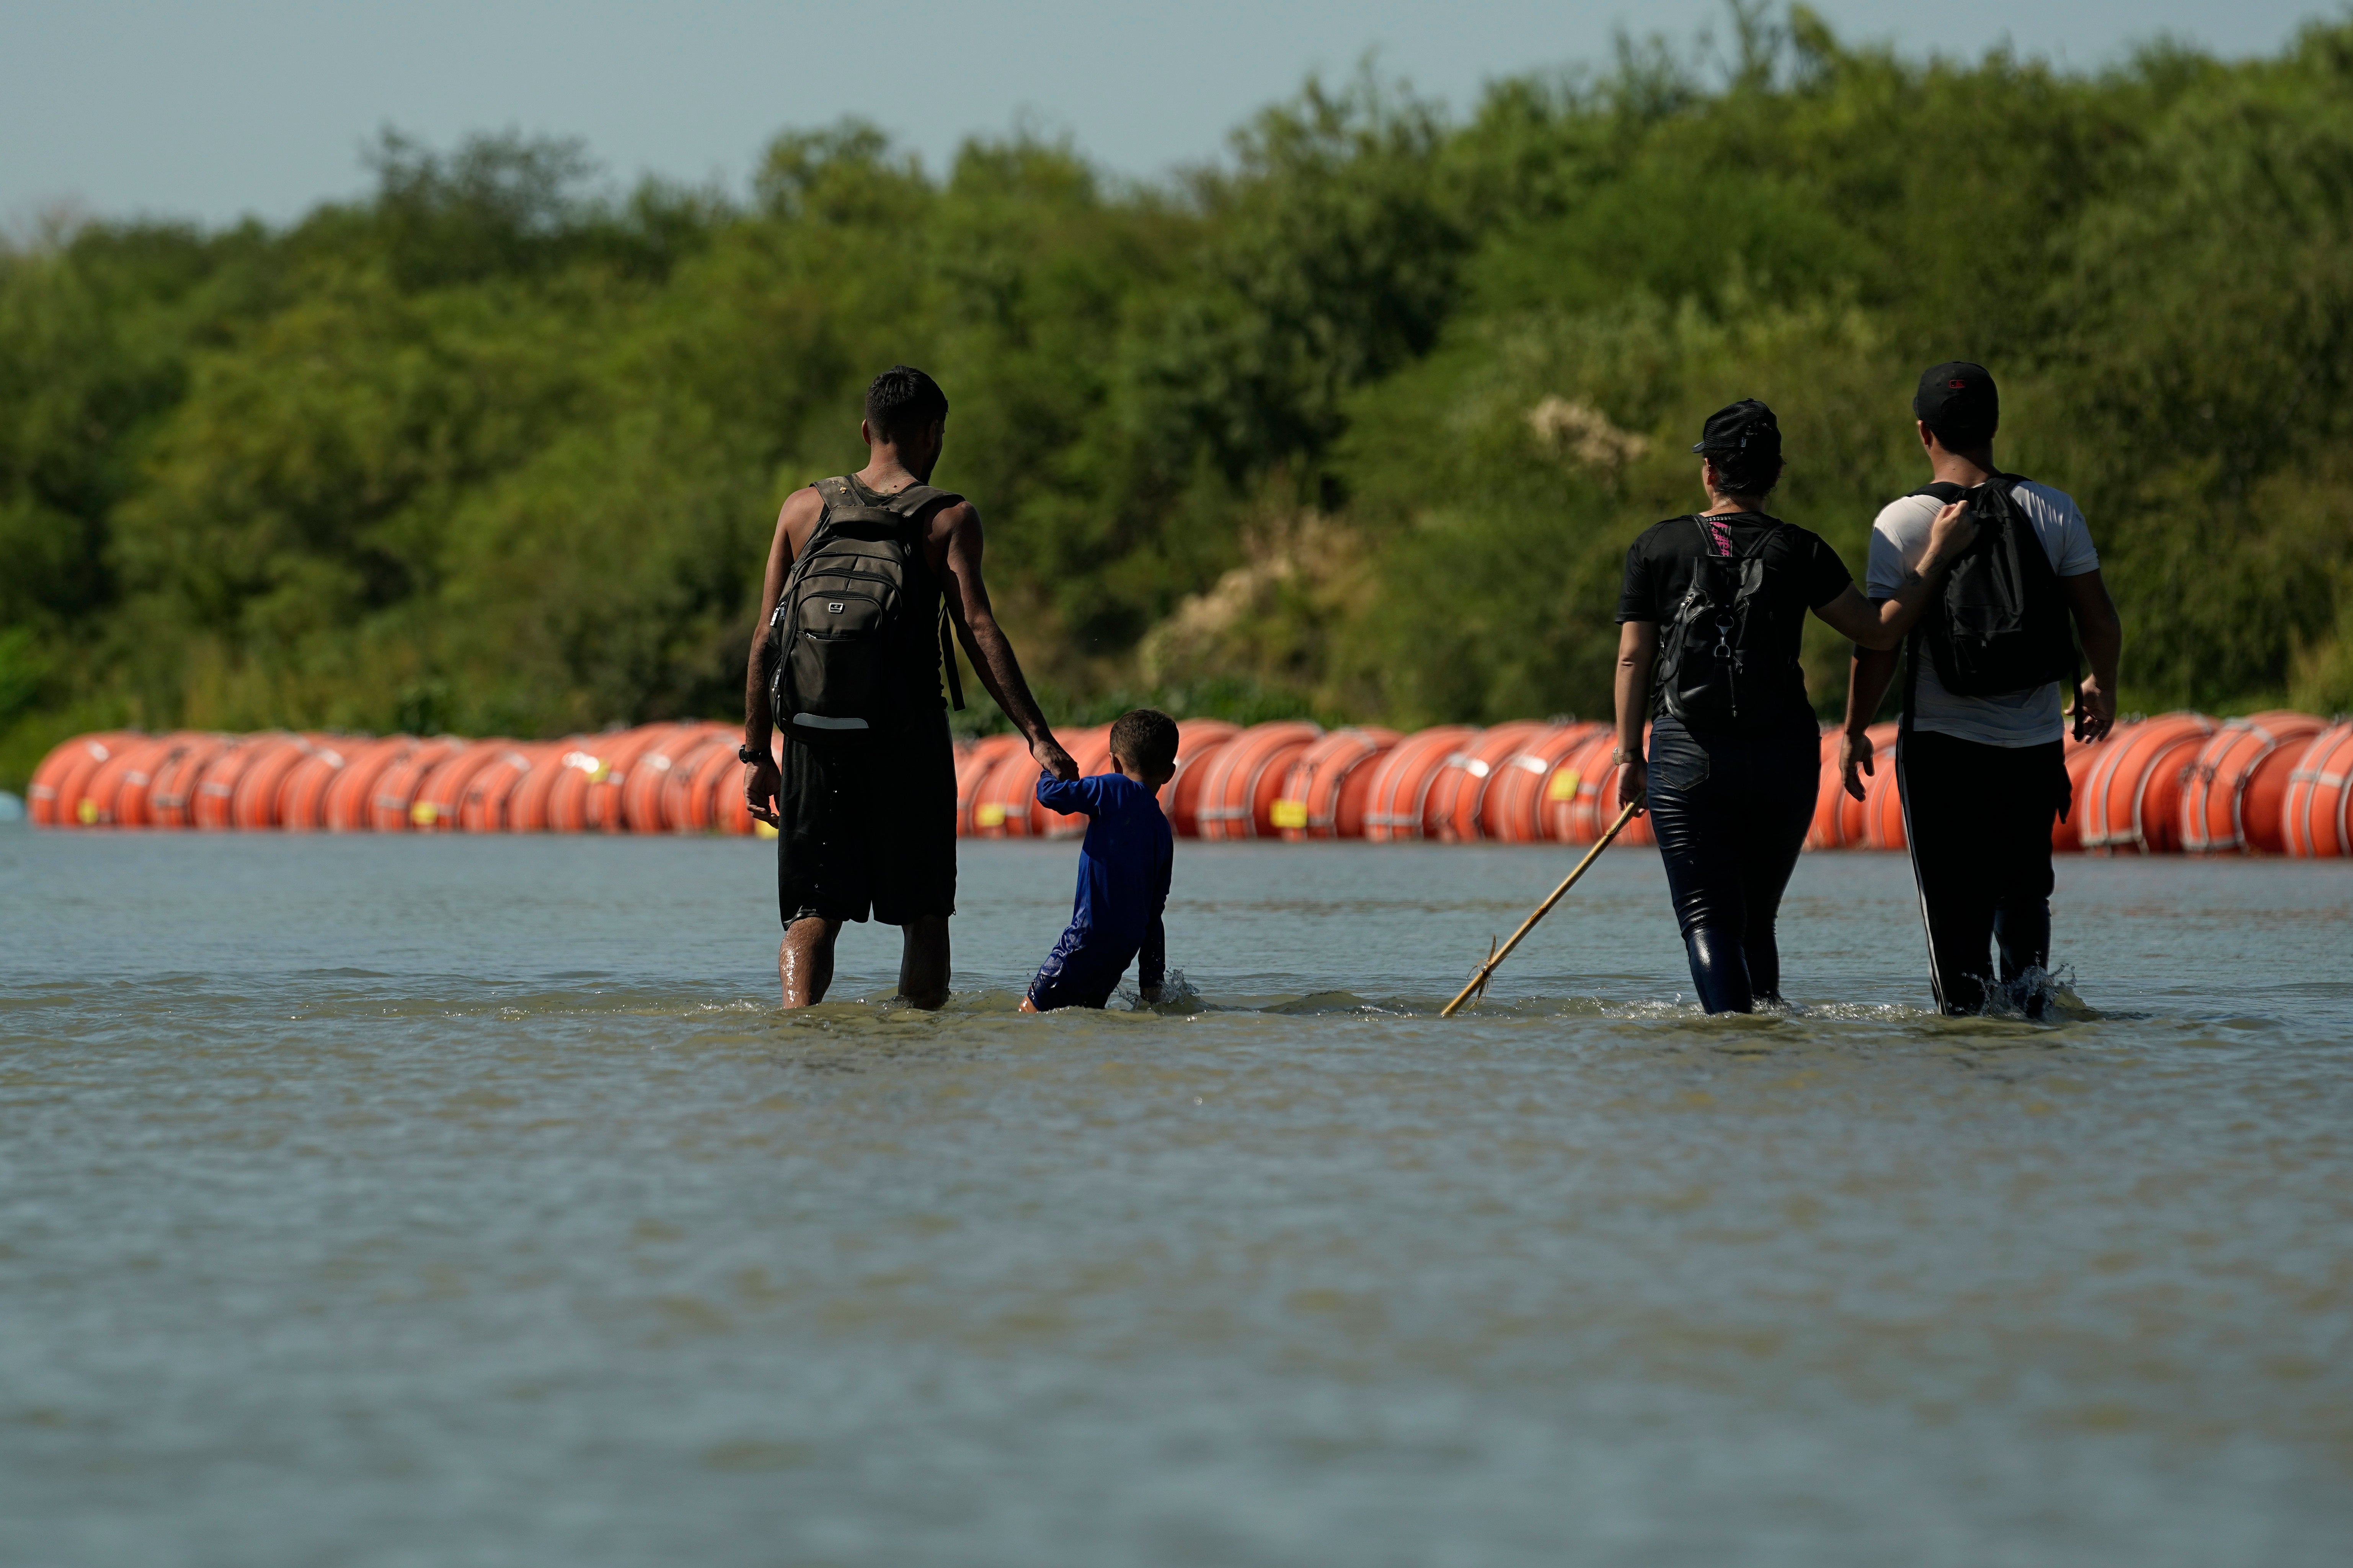 Texas has installed razor wire, walls, and floating buoys to deter migration